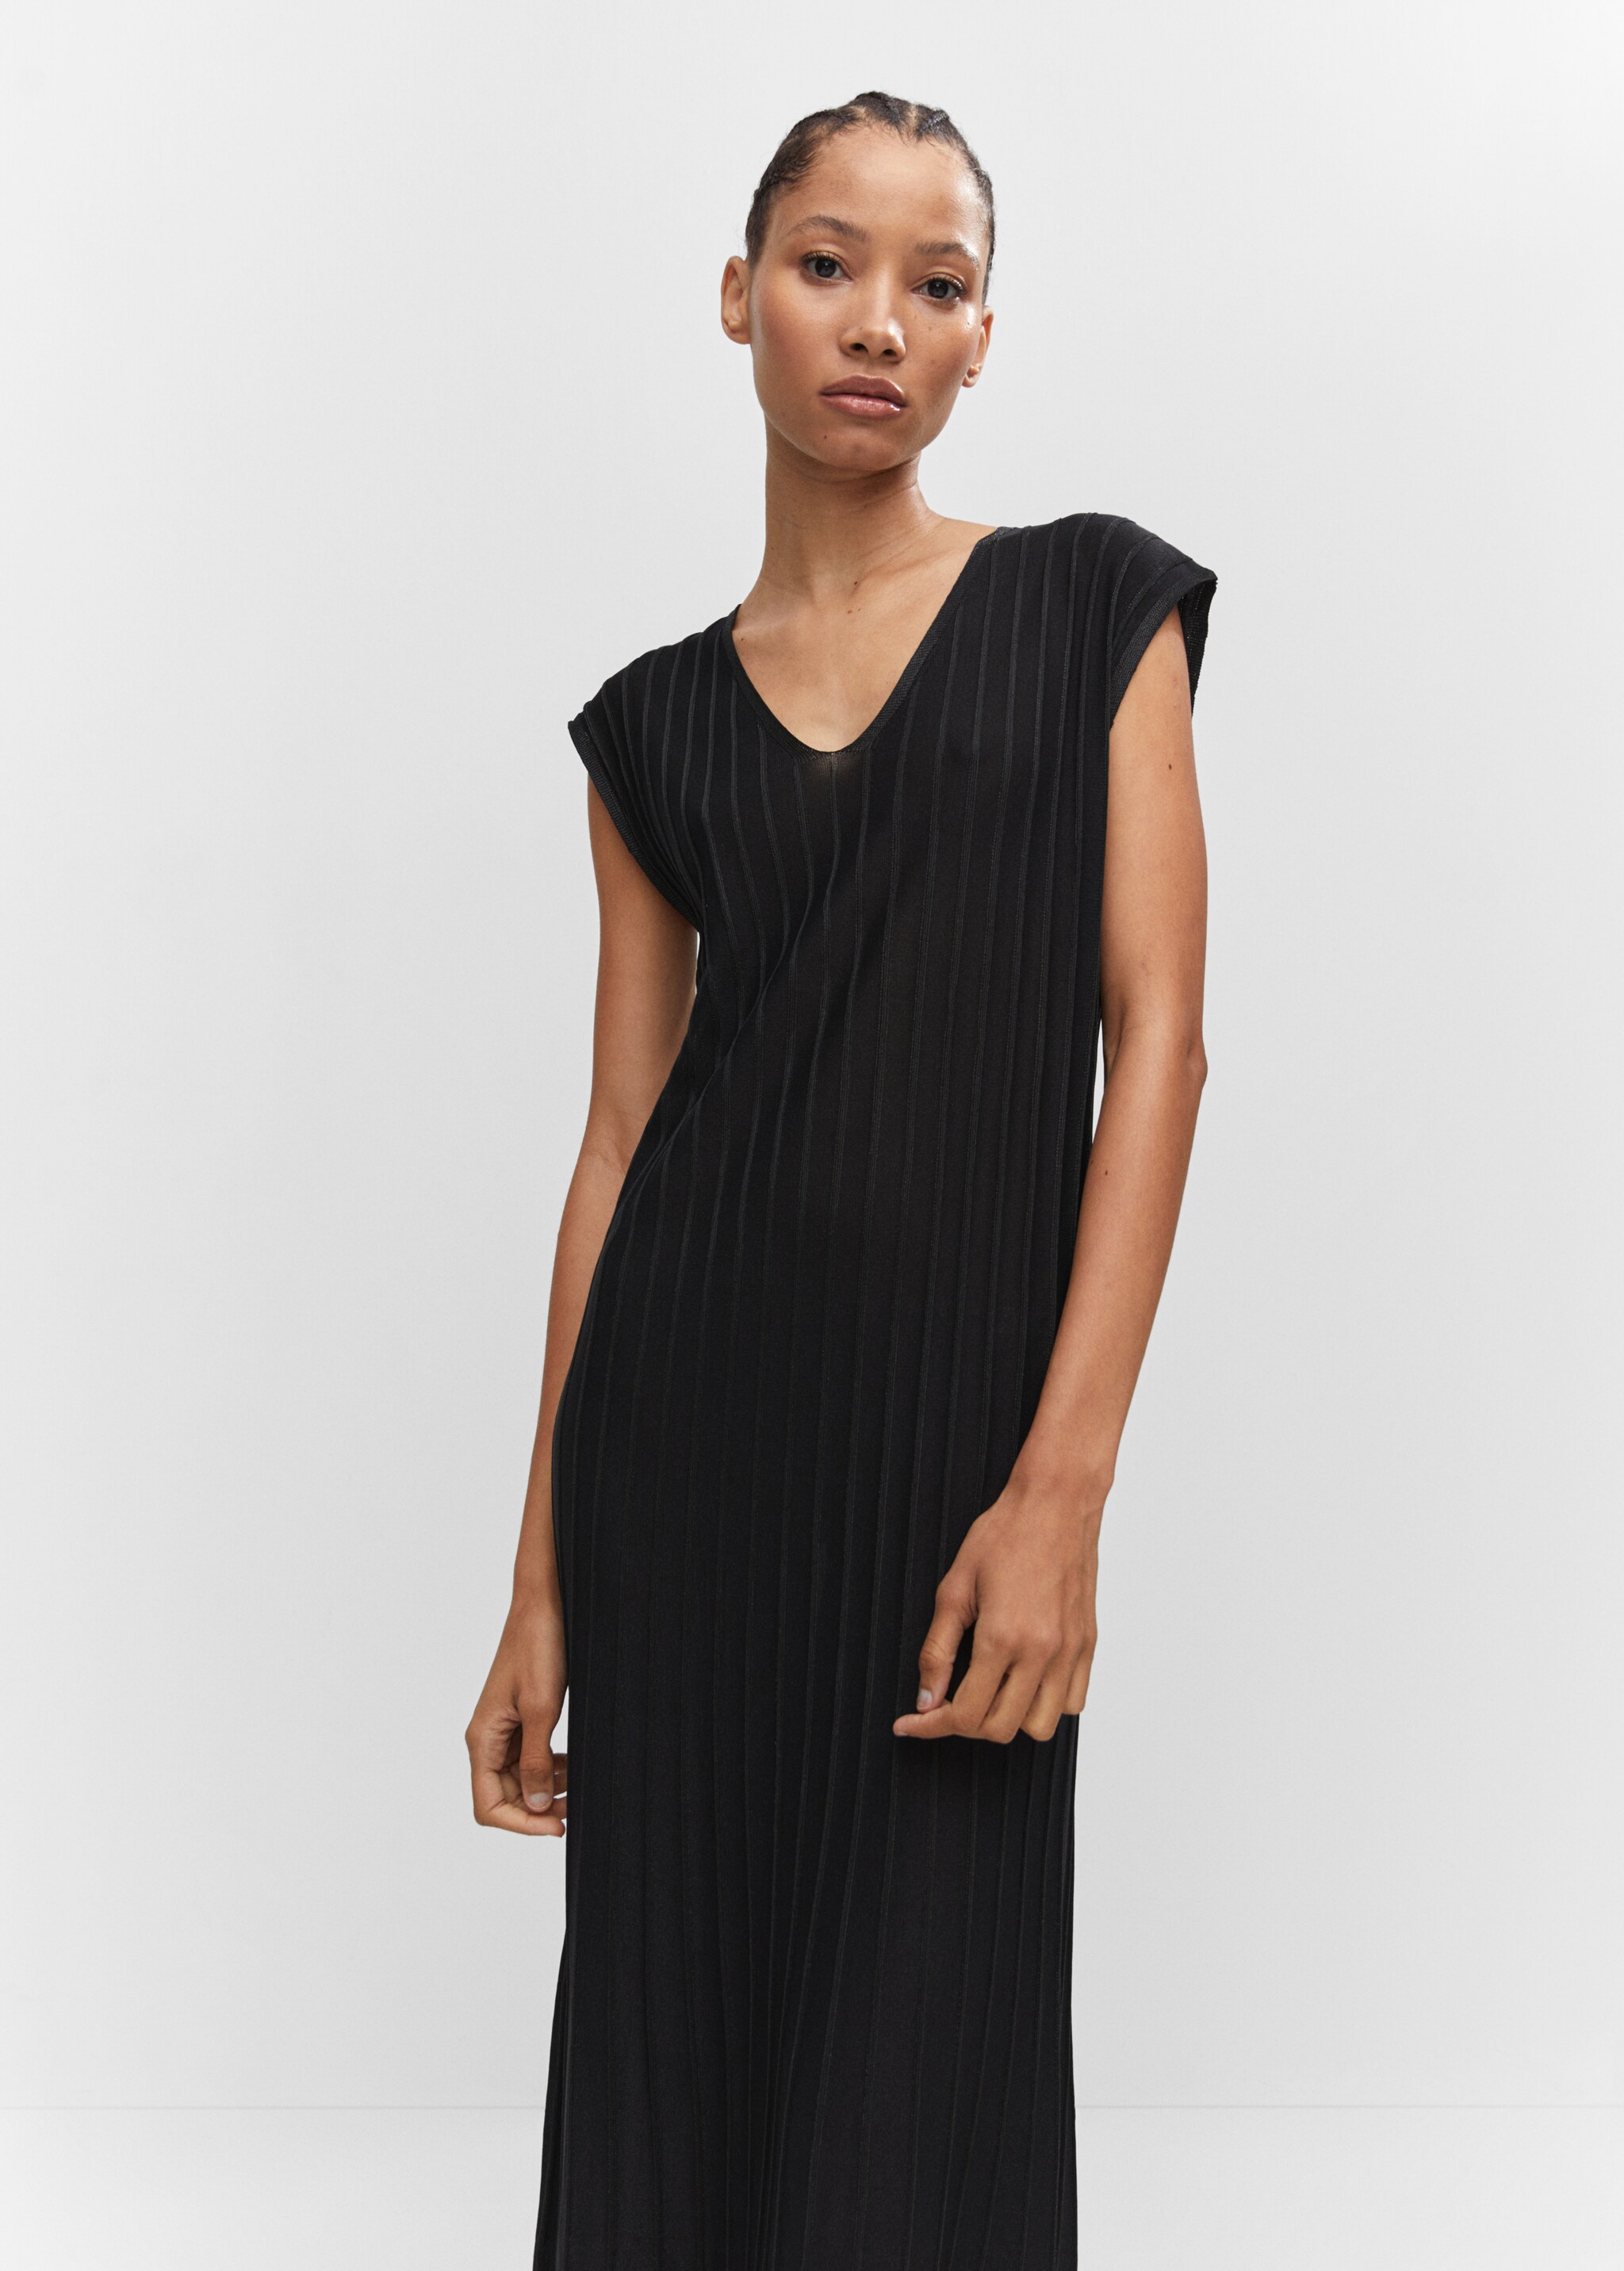 Knitted dress with contrasting details - Medium plane